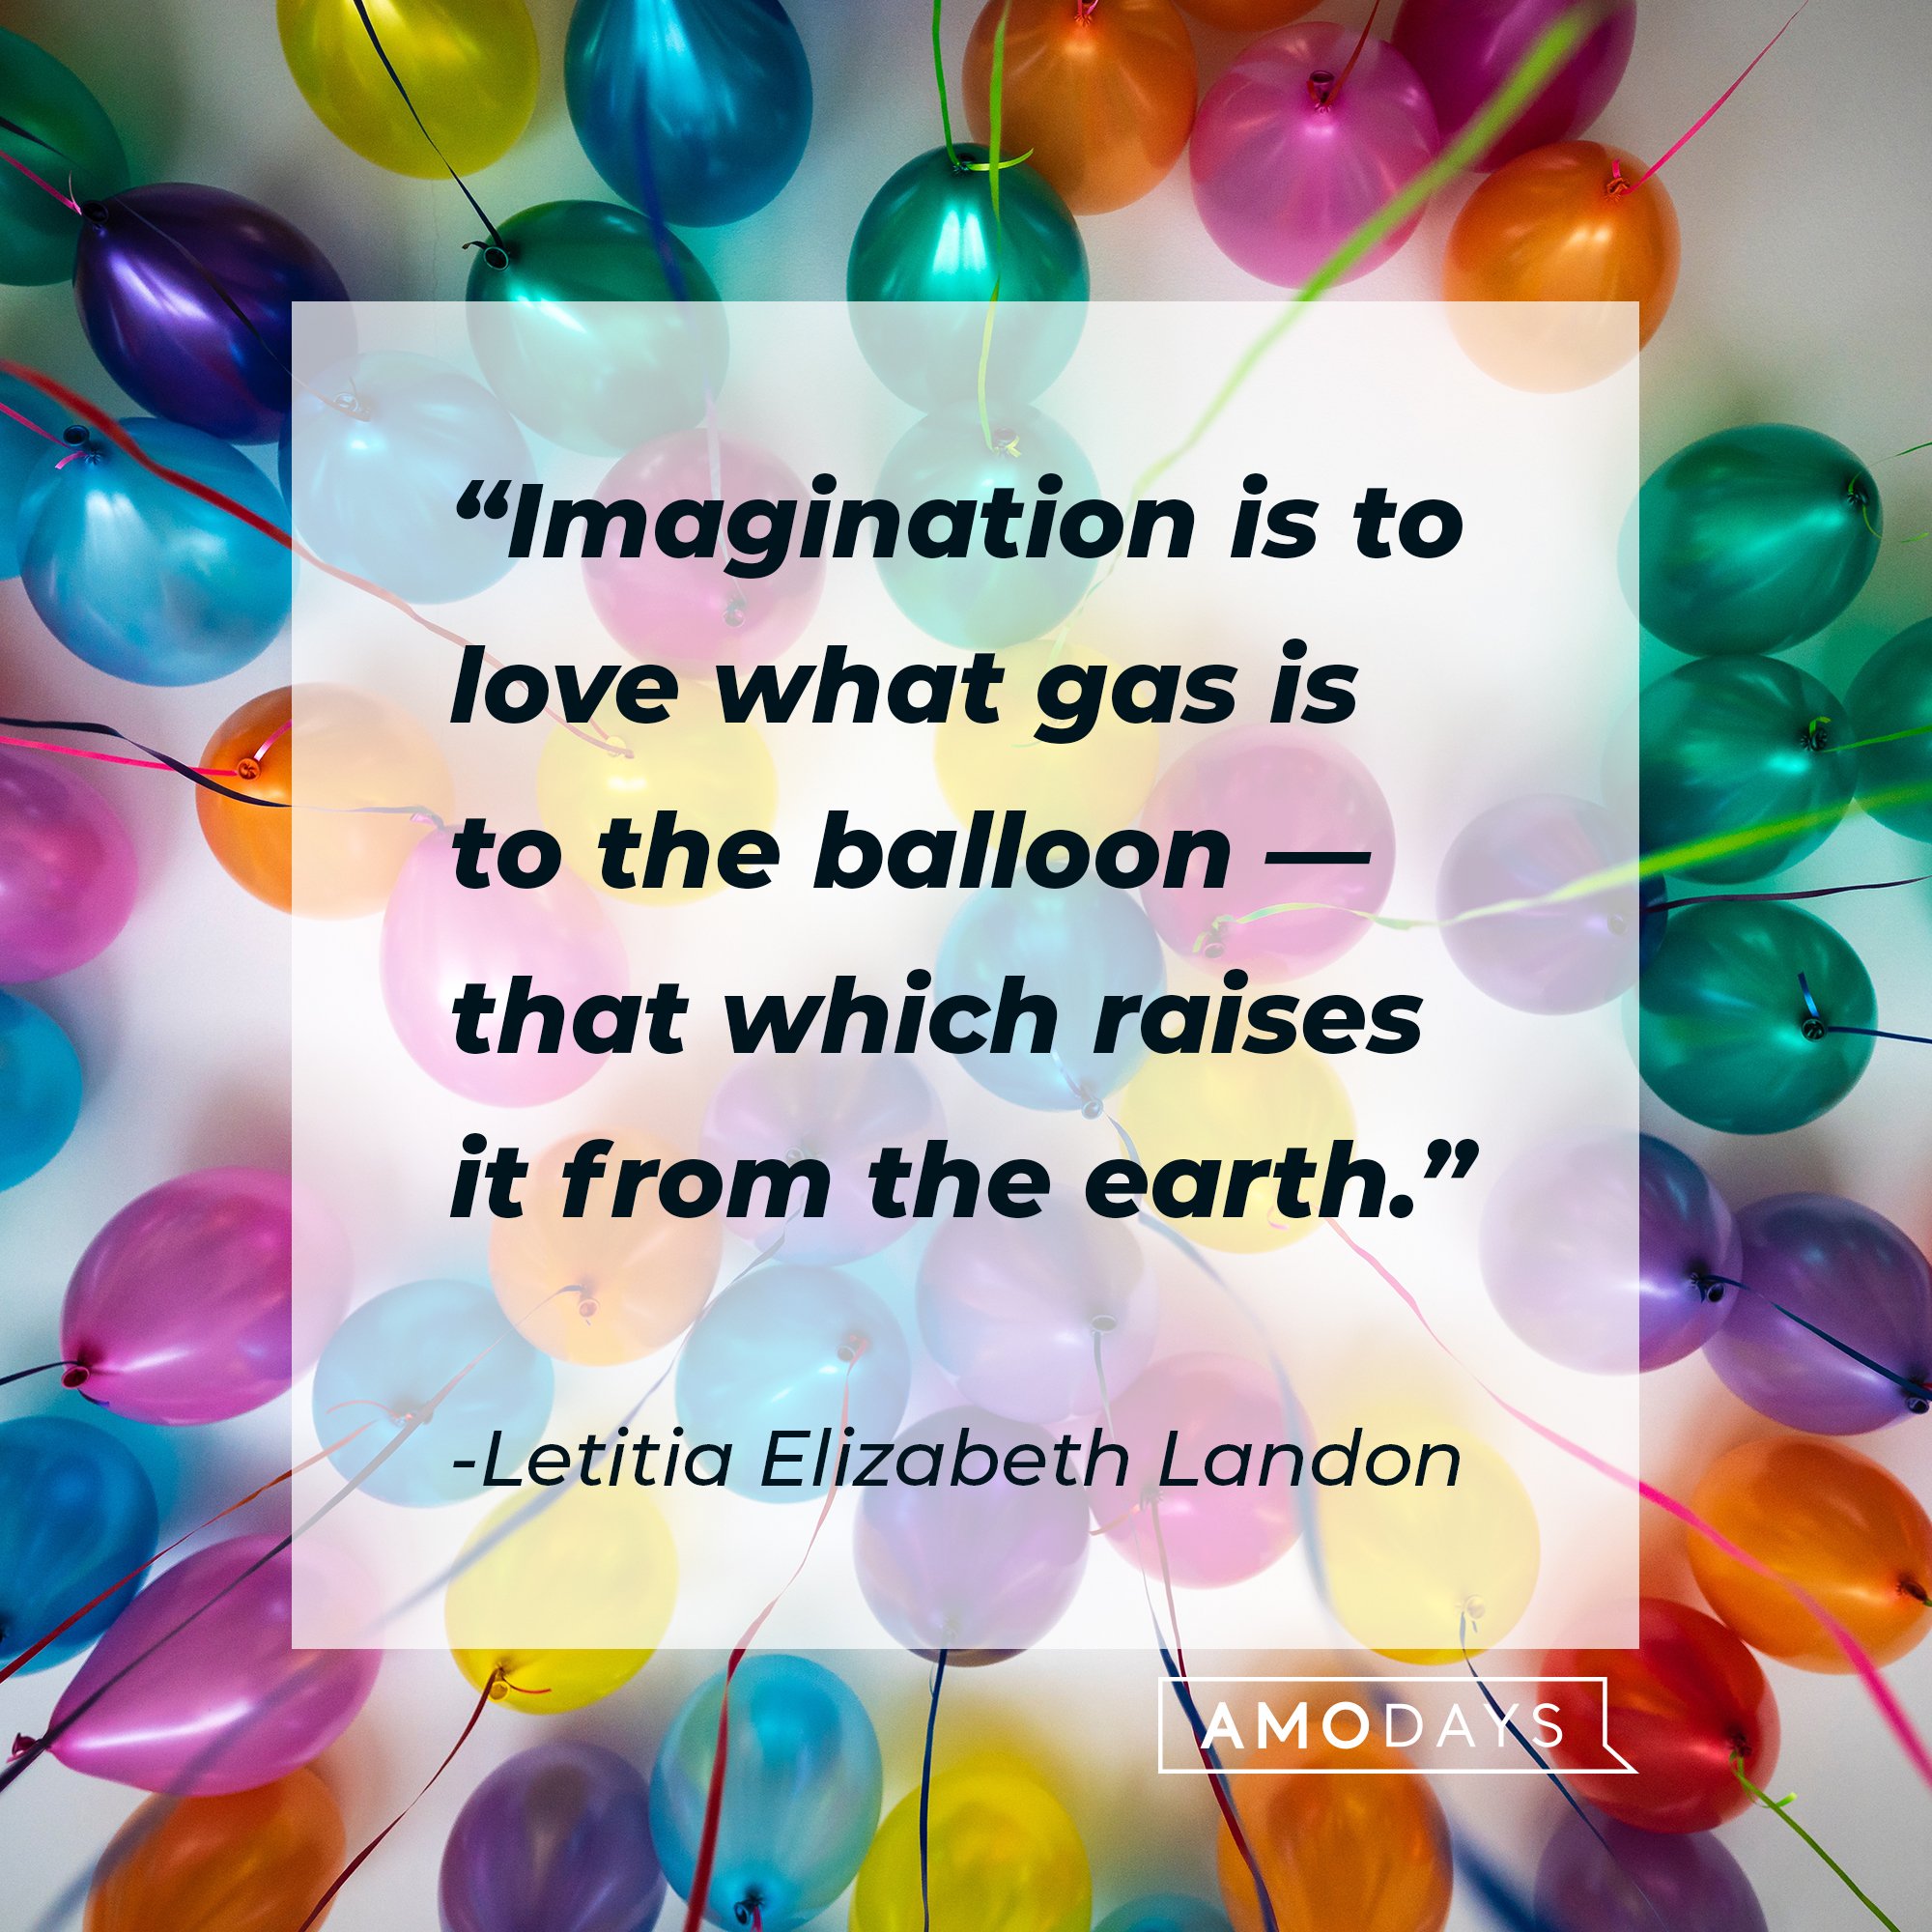 Letitia Elizabeth Landon’s quote: "Imagination is to love what gas is to the balloon — that which raises it from the earth."  | Image: AmoDays